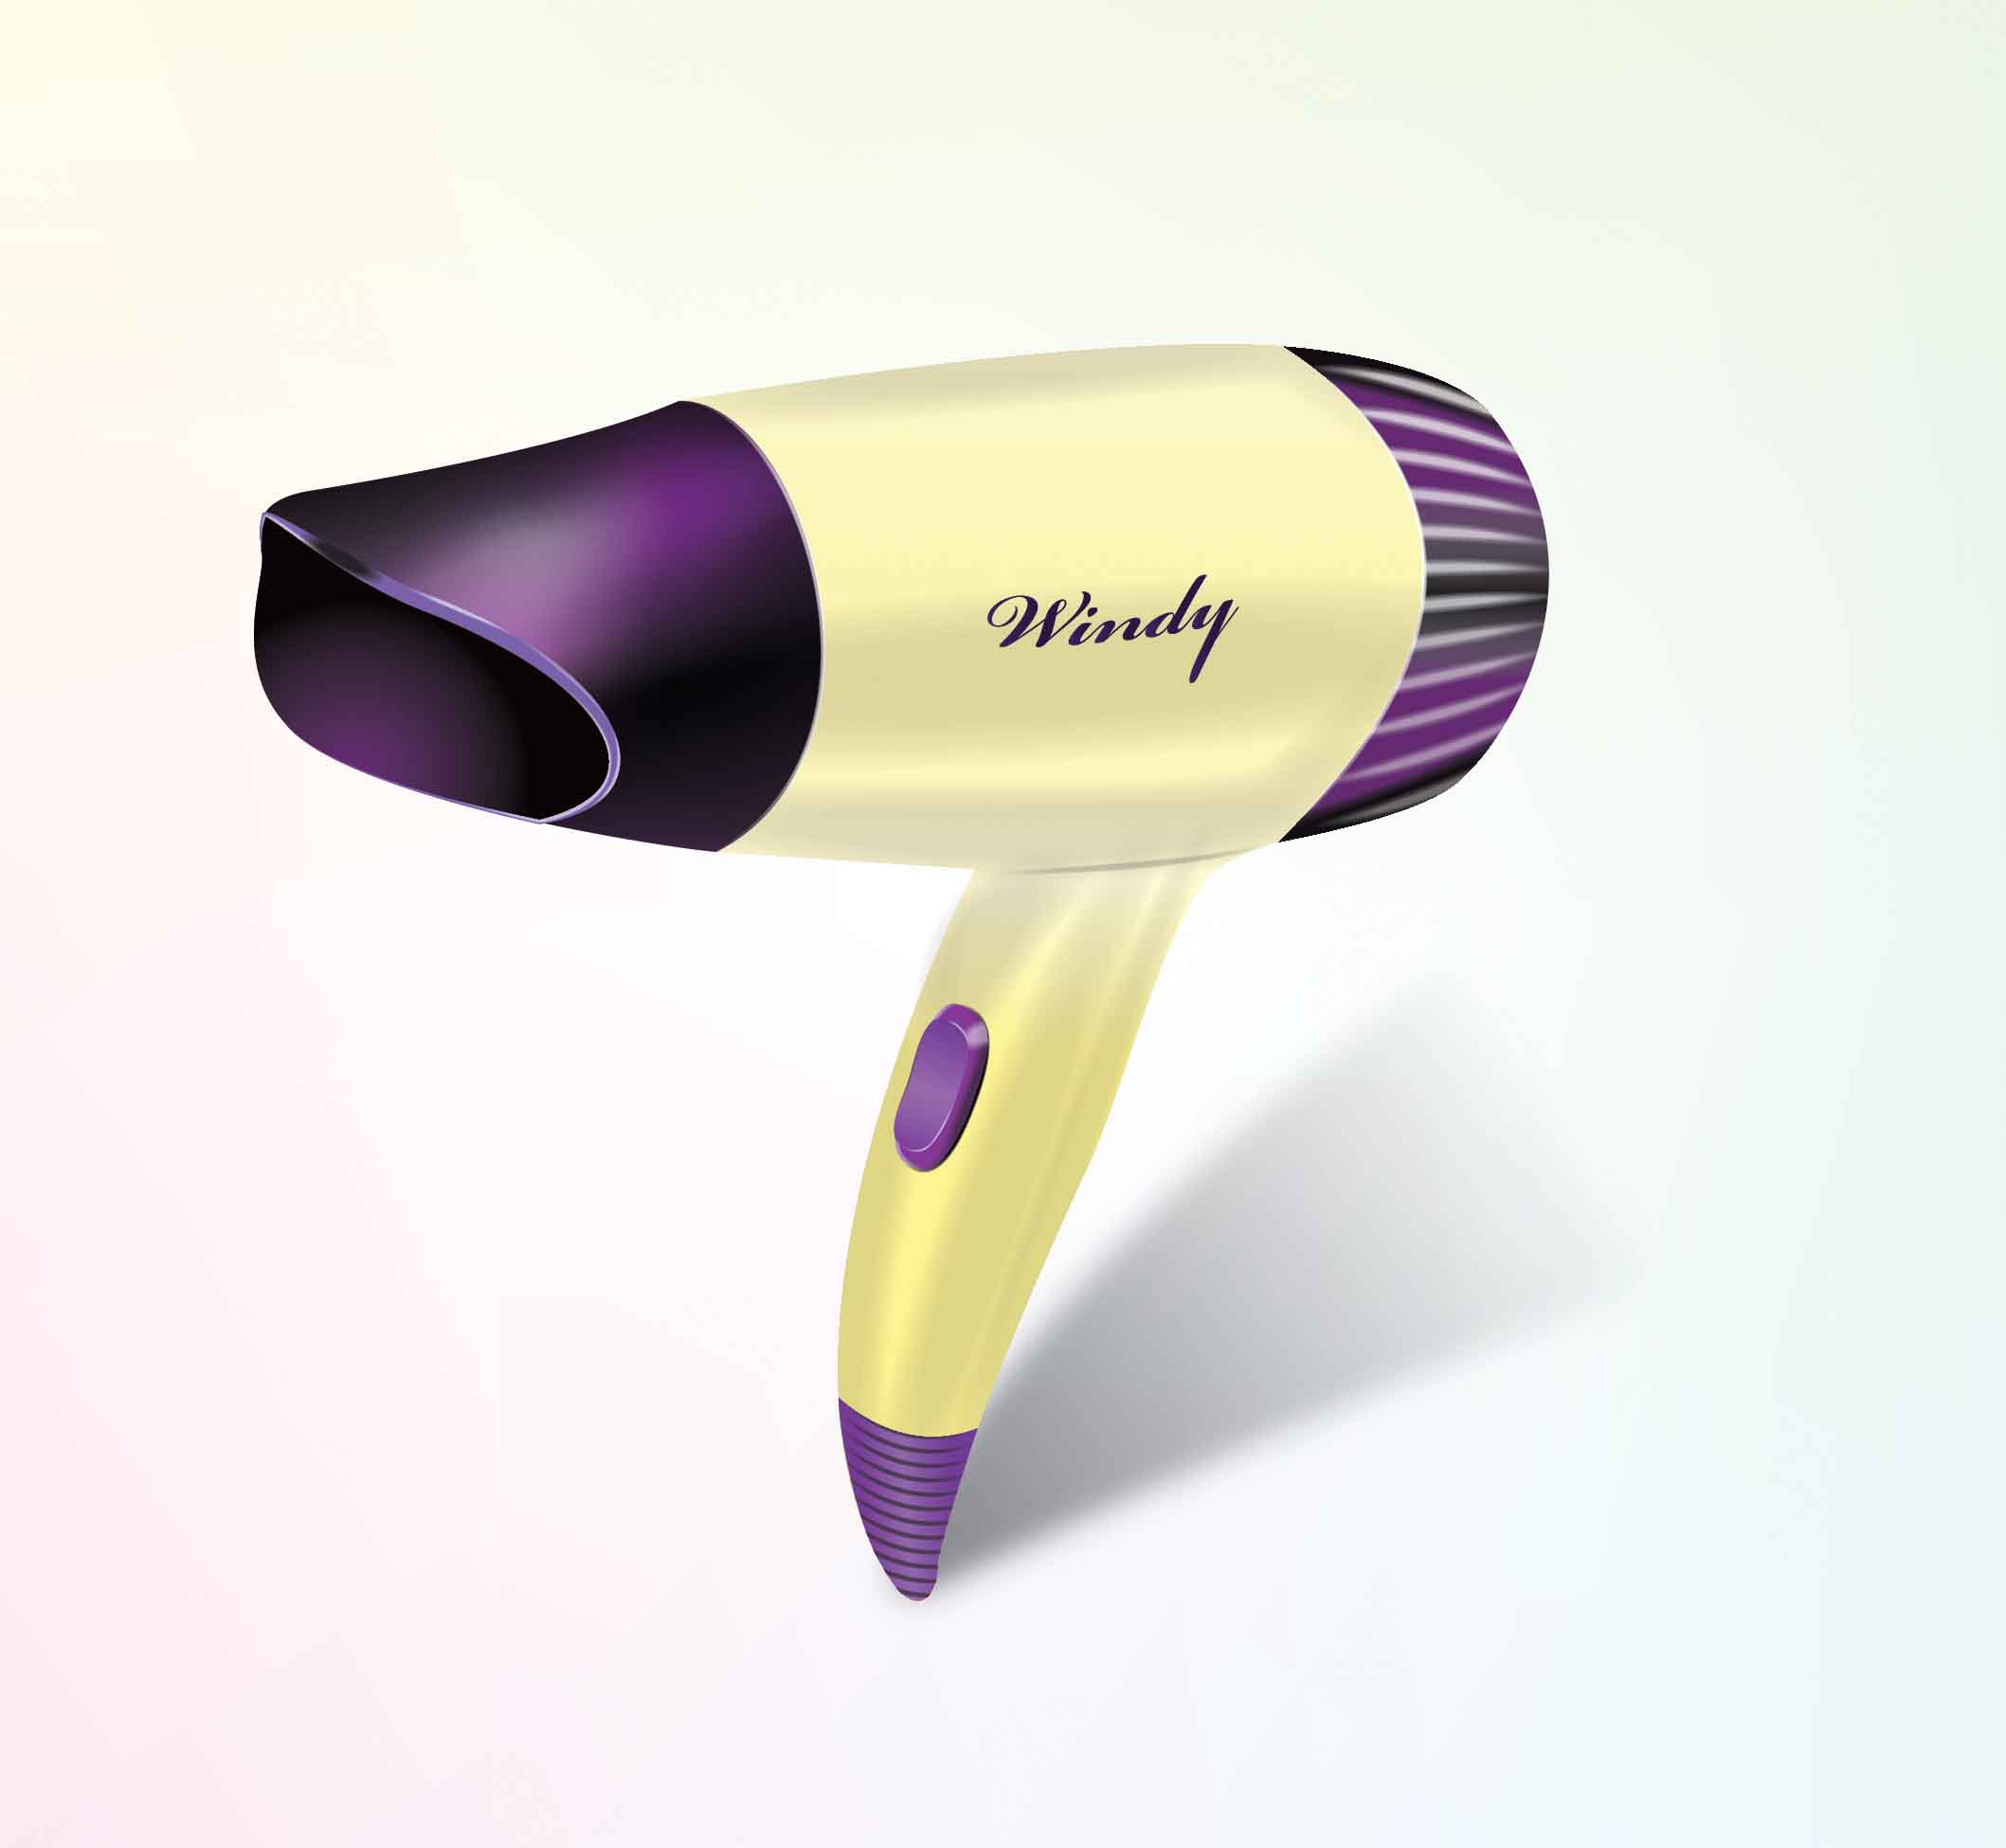 Hair Dryers – What You Need To Know Before You Buy